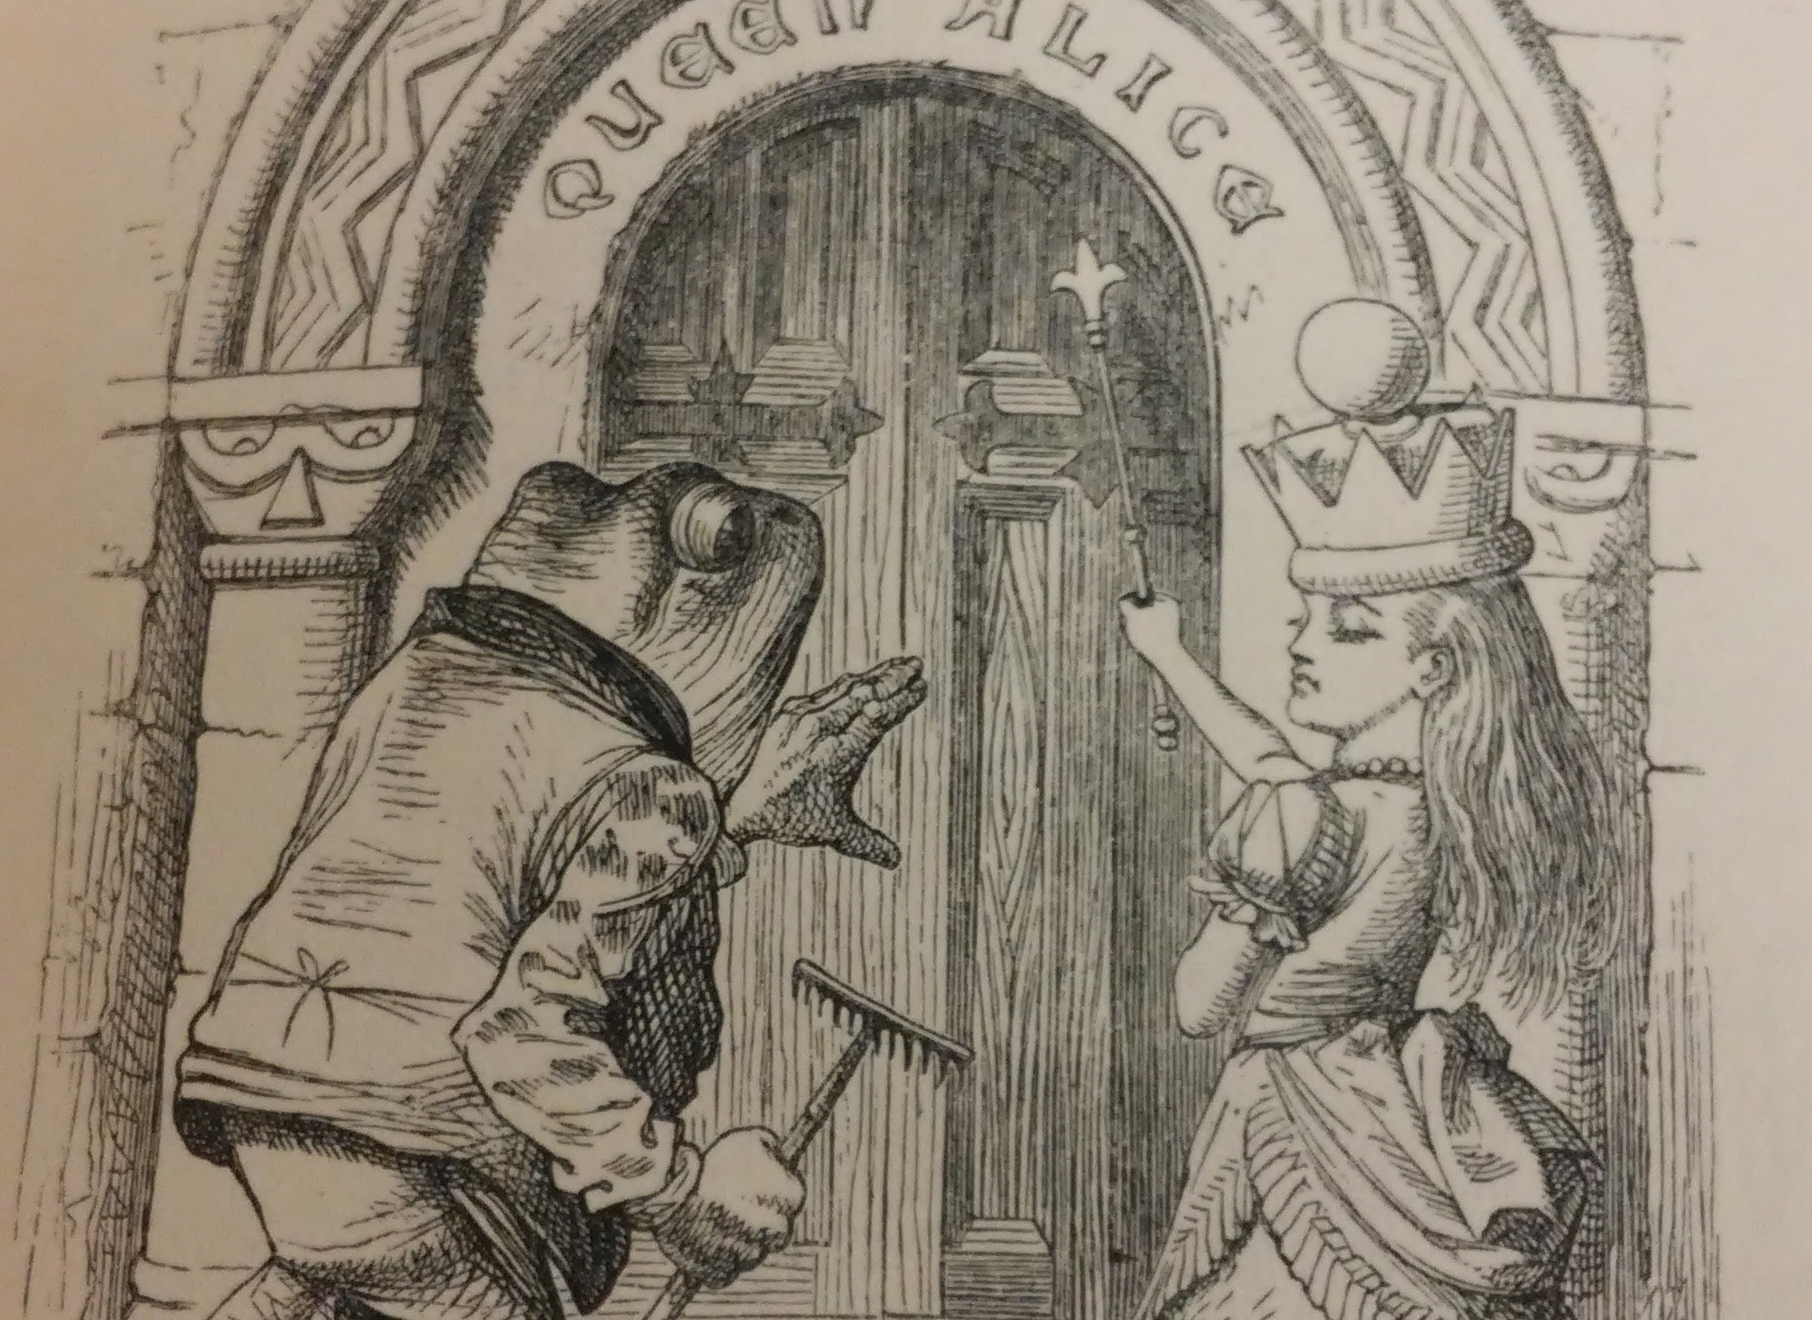 "Queen Alice" from the first edition of Through the Looking Glass, from the Milner Library Special Collections.